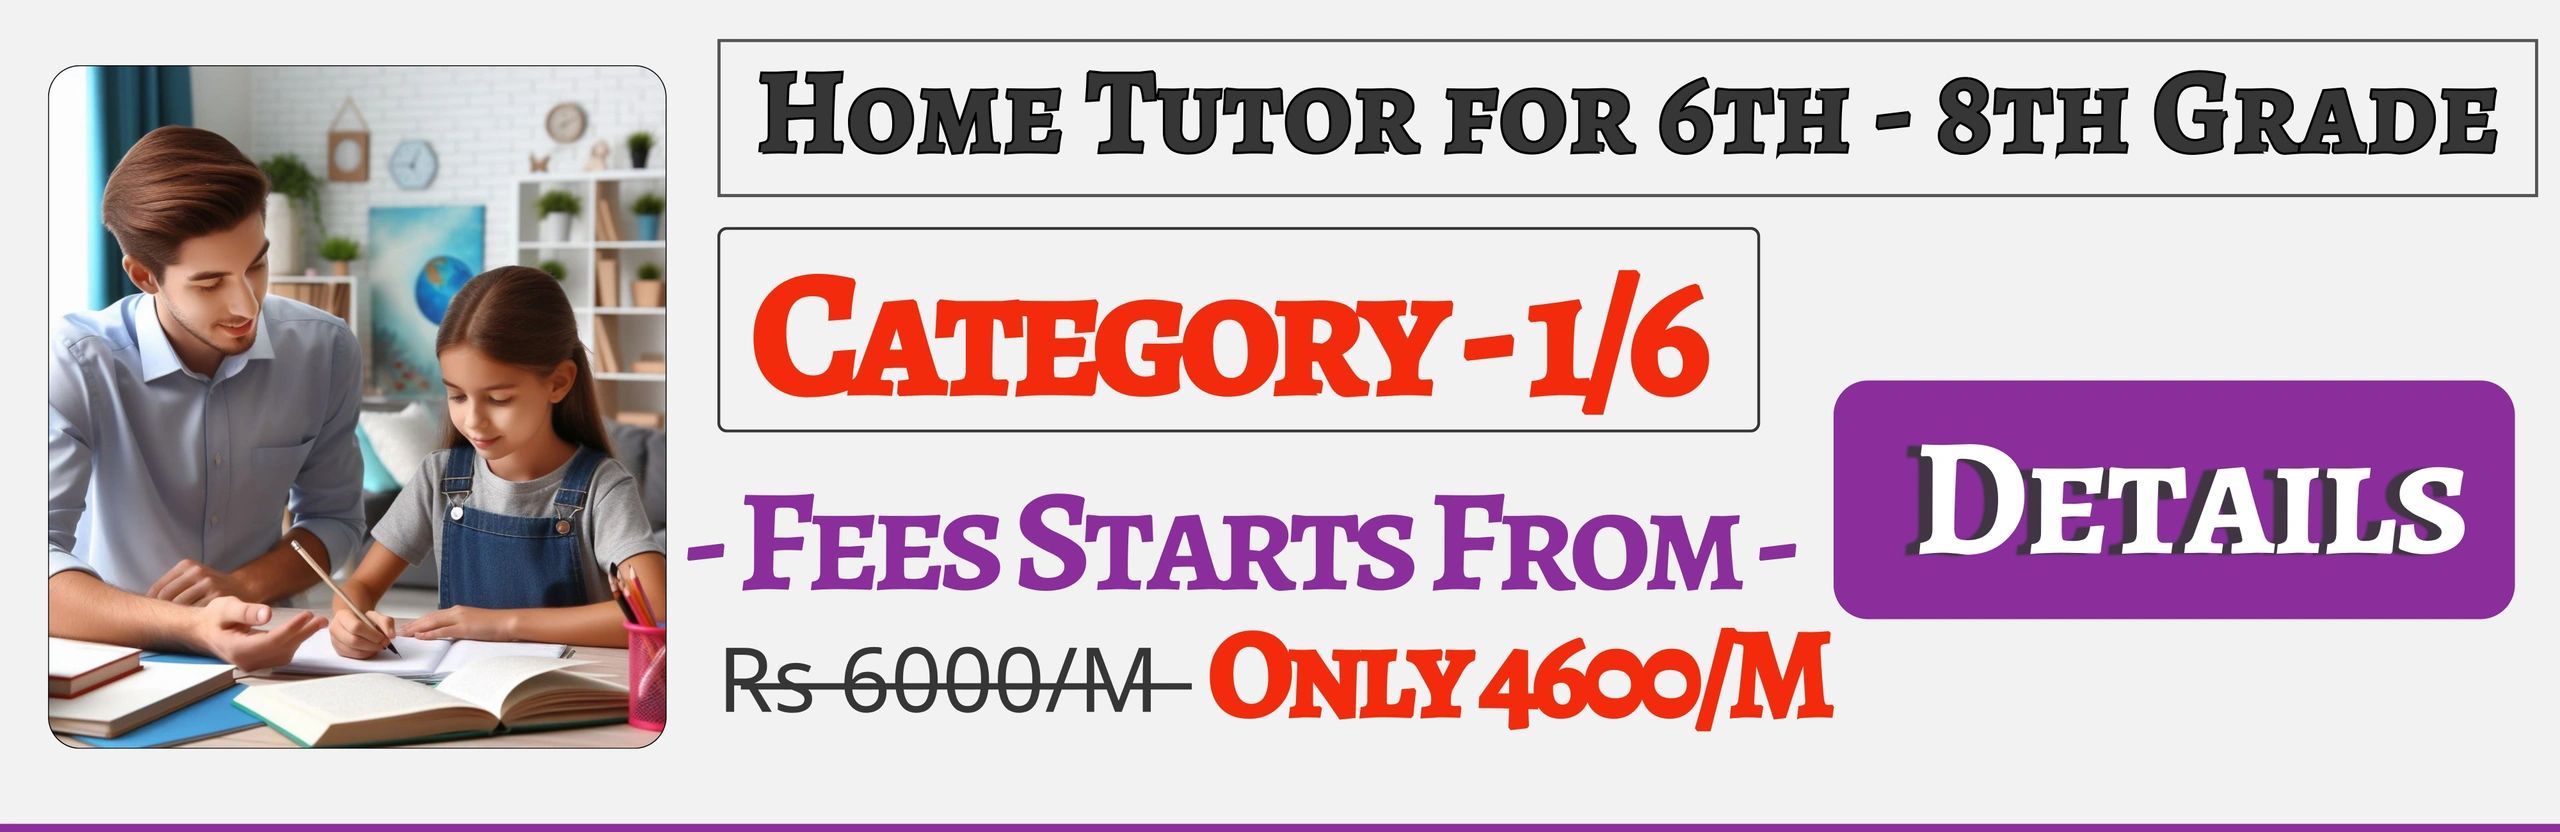 Book Best Home Tuition Tutors For 6th 7th & 8th In Jaipur Fees Only 4600/M